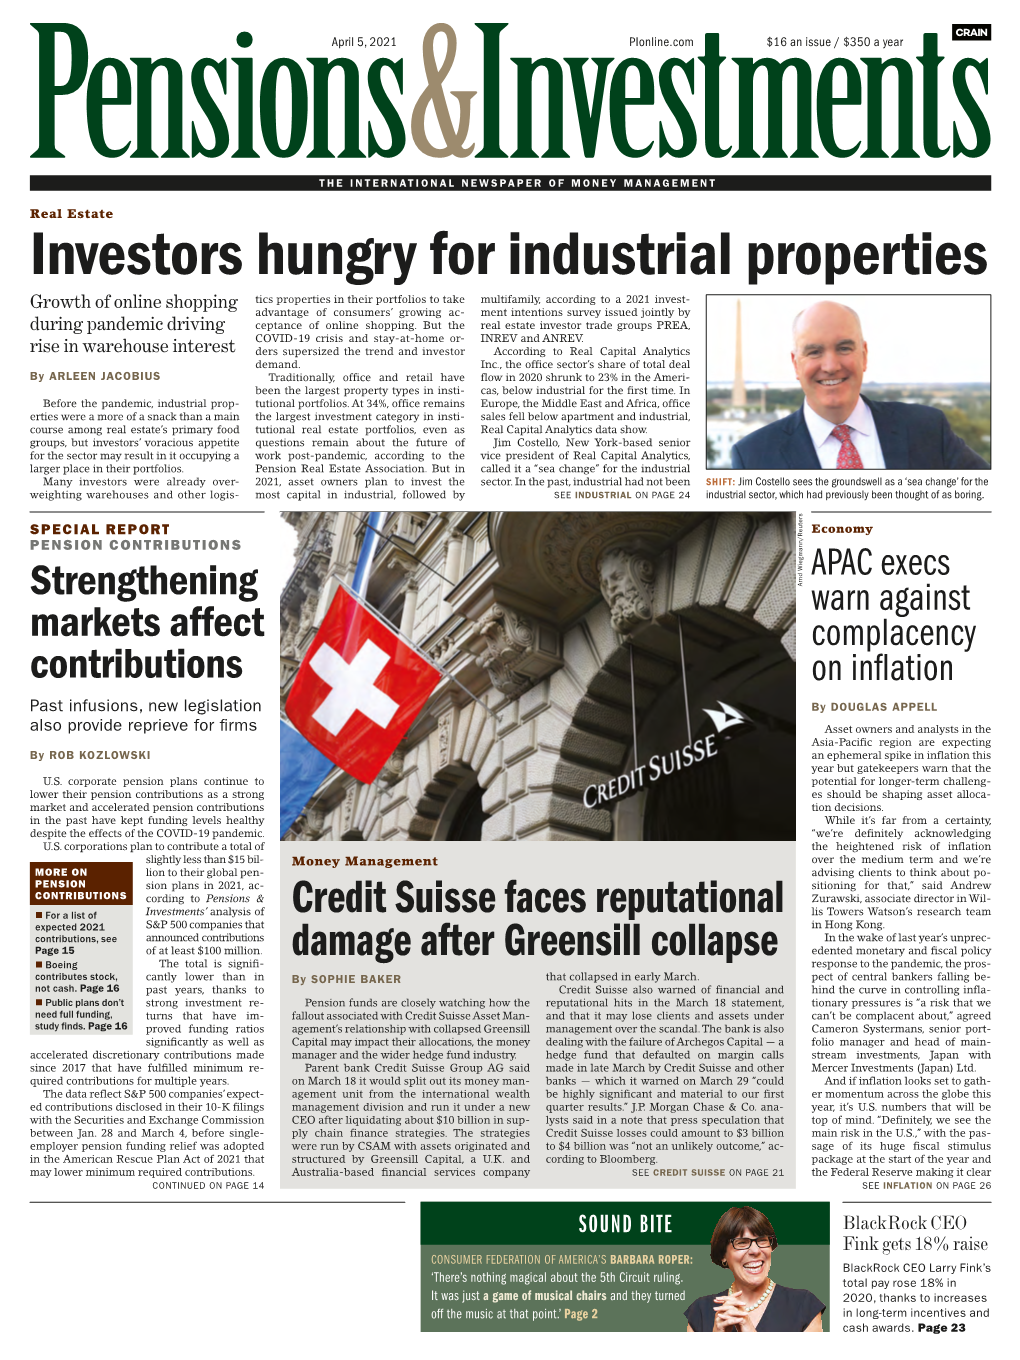 Investors Hungry for Industrial Properties